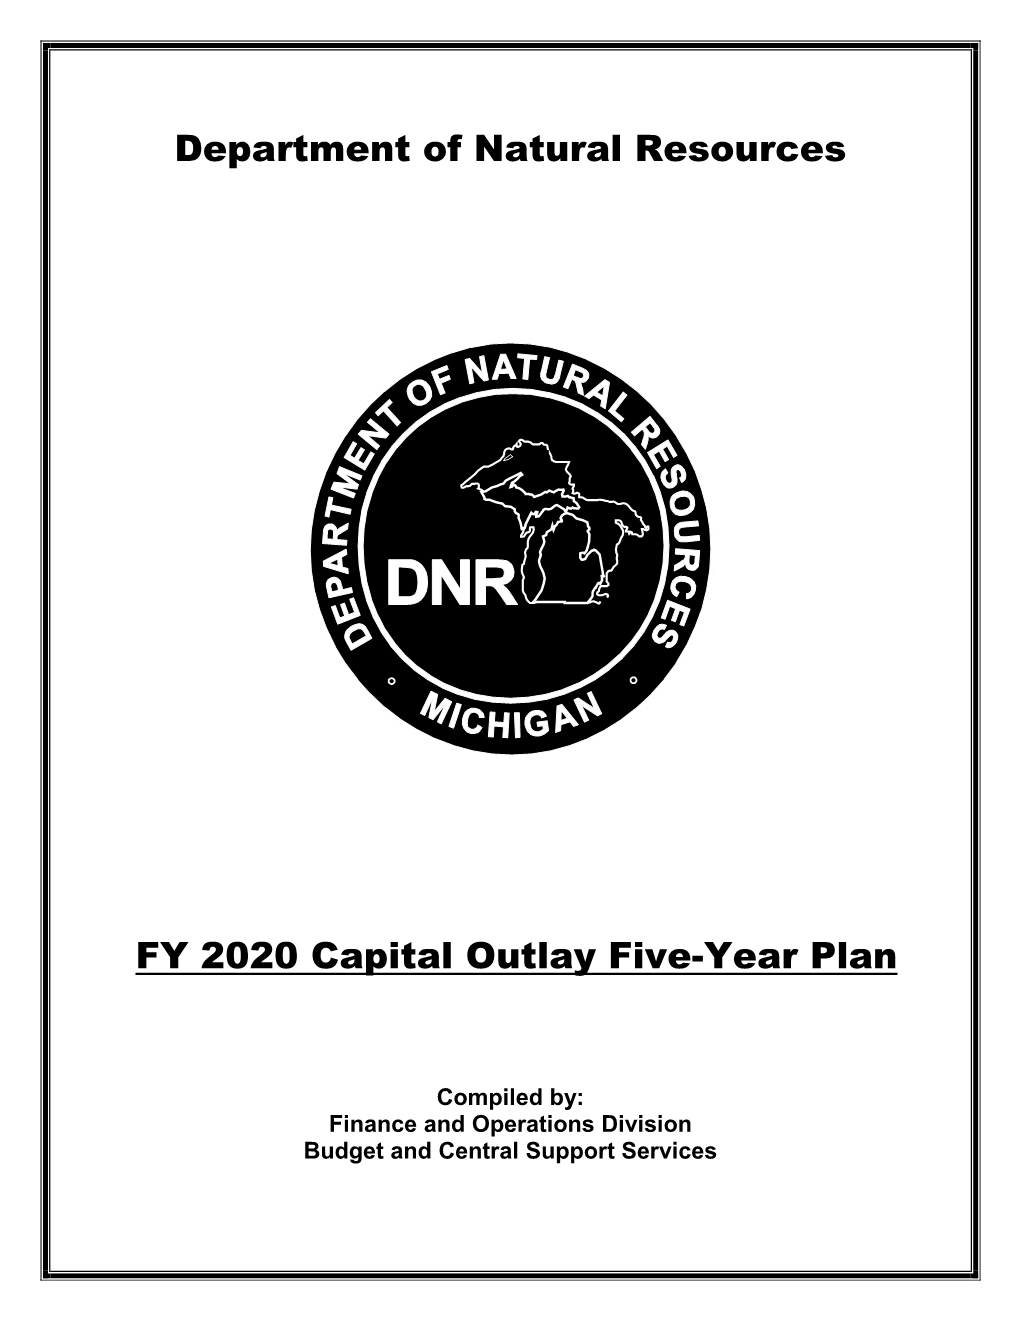 Department of Natural Resources FY 2020 Capital Outlay Five-Year Plan